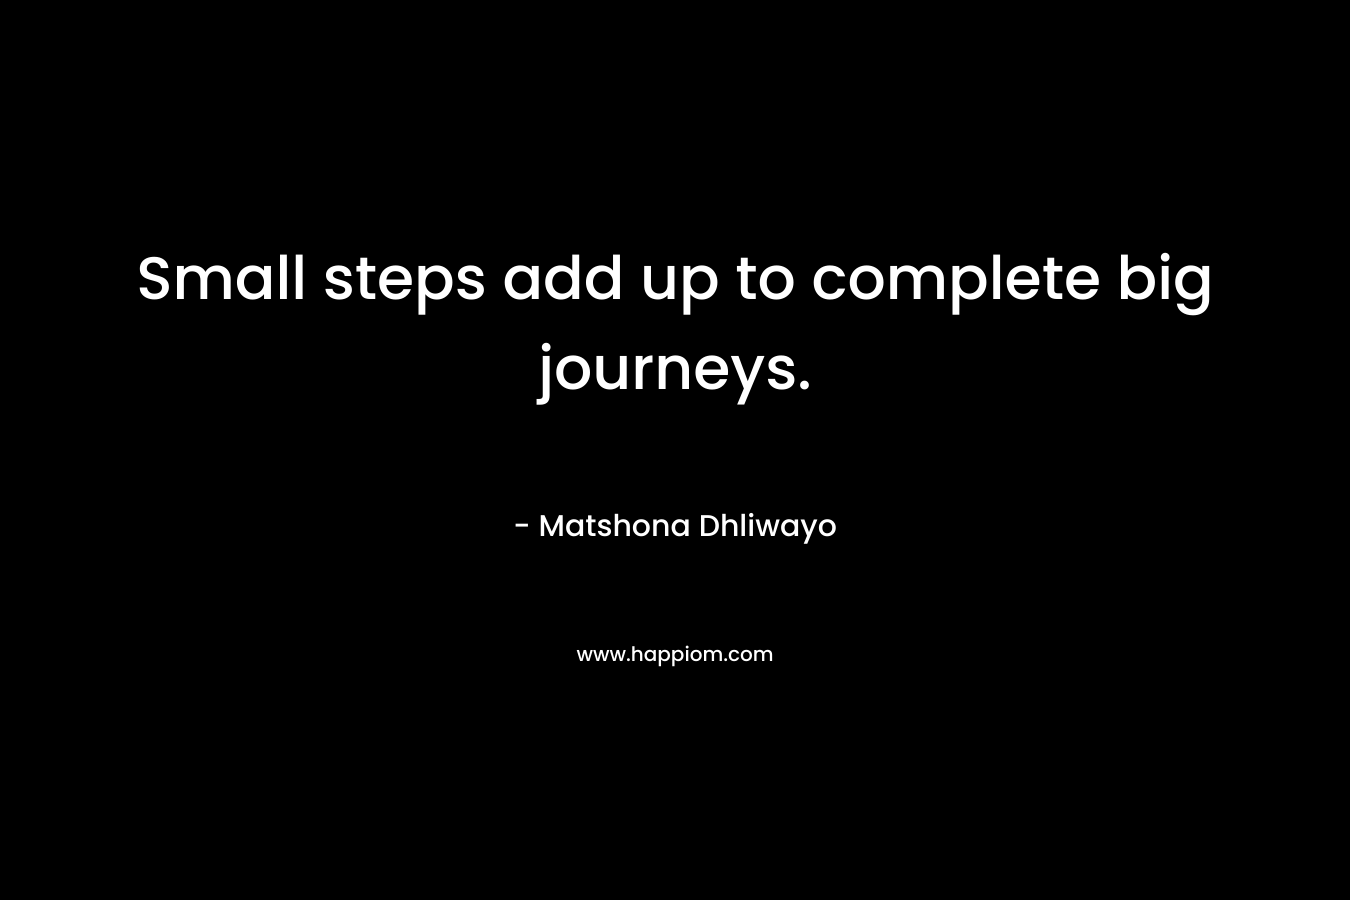 Small steps add up to complete big journeys.